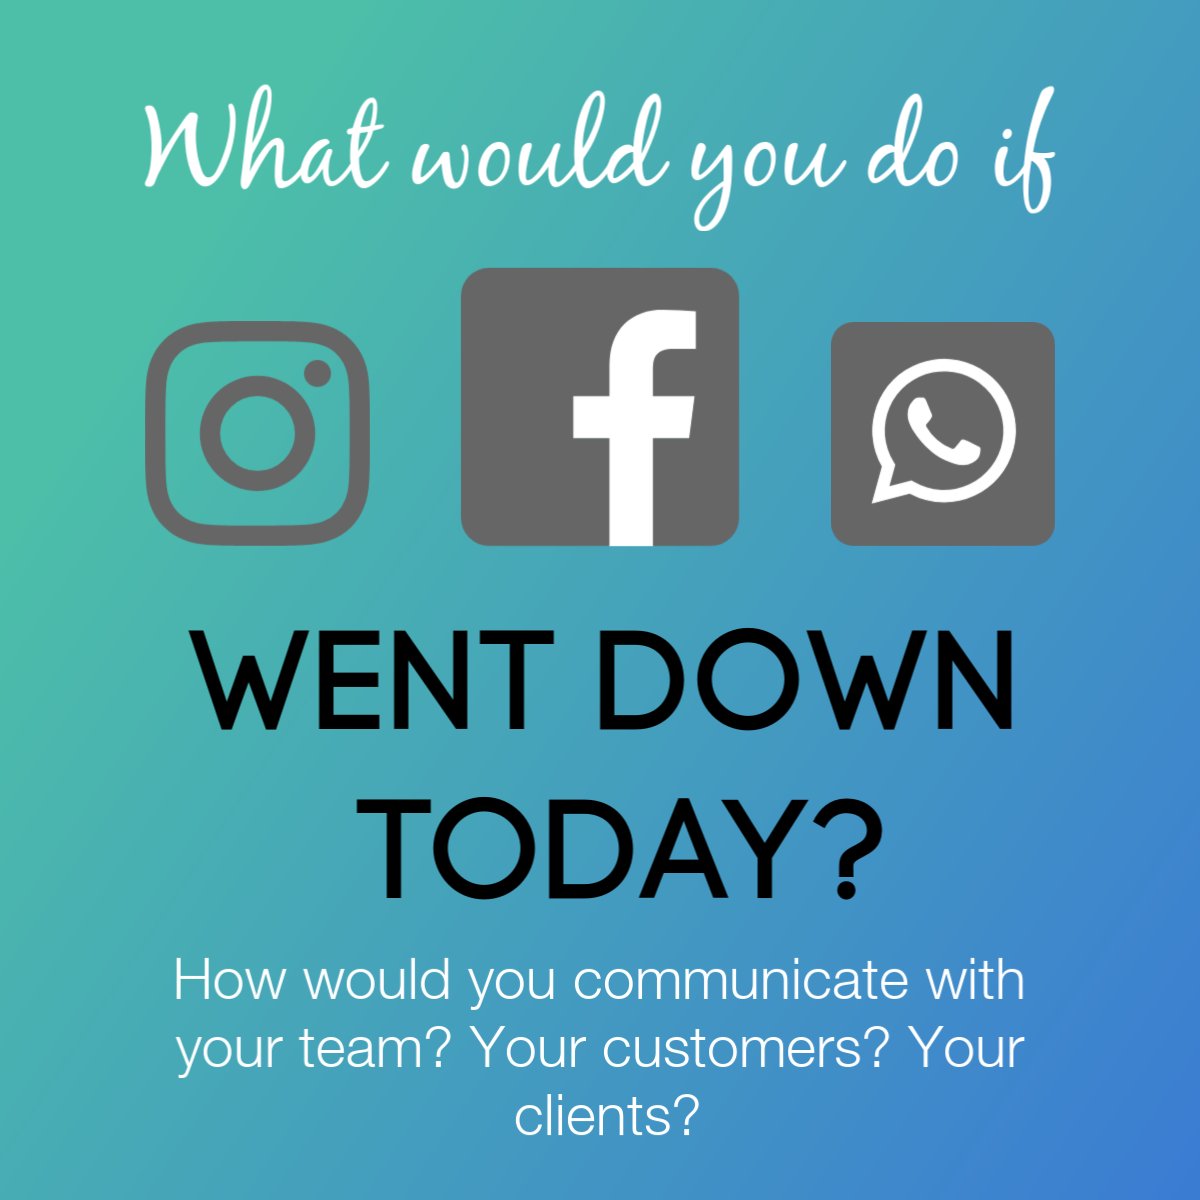 How would you communicate with your team and clients if your favorite Social Media site went down today? Click link for the solution. bit.ly/2VQjaM9